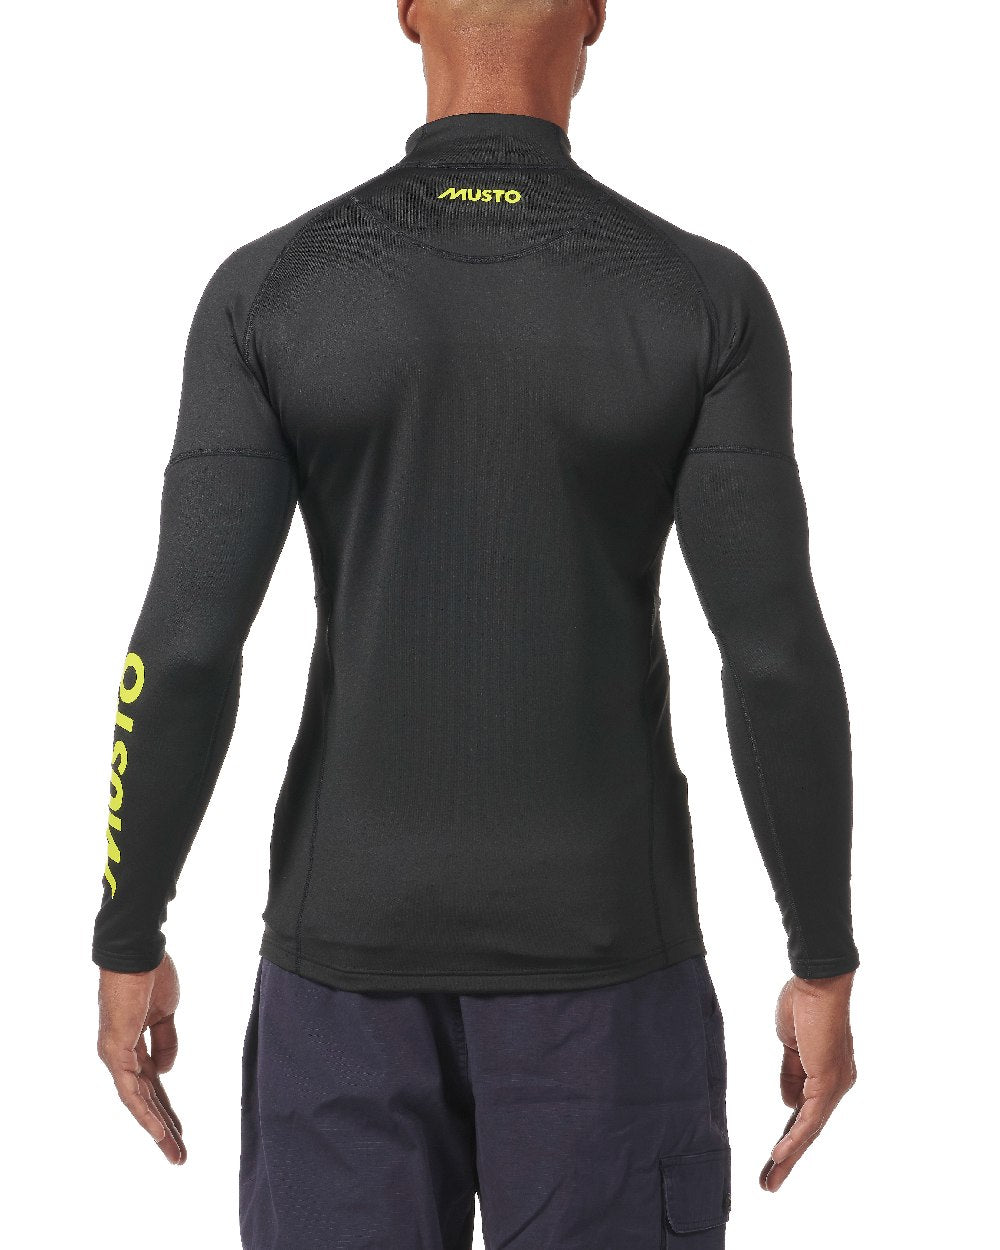 Black coloured Musto Mens Hydrothermal Top 2.0 on white background 